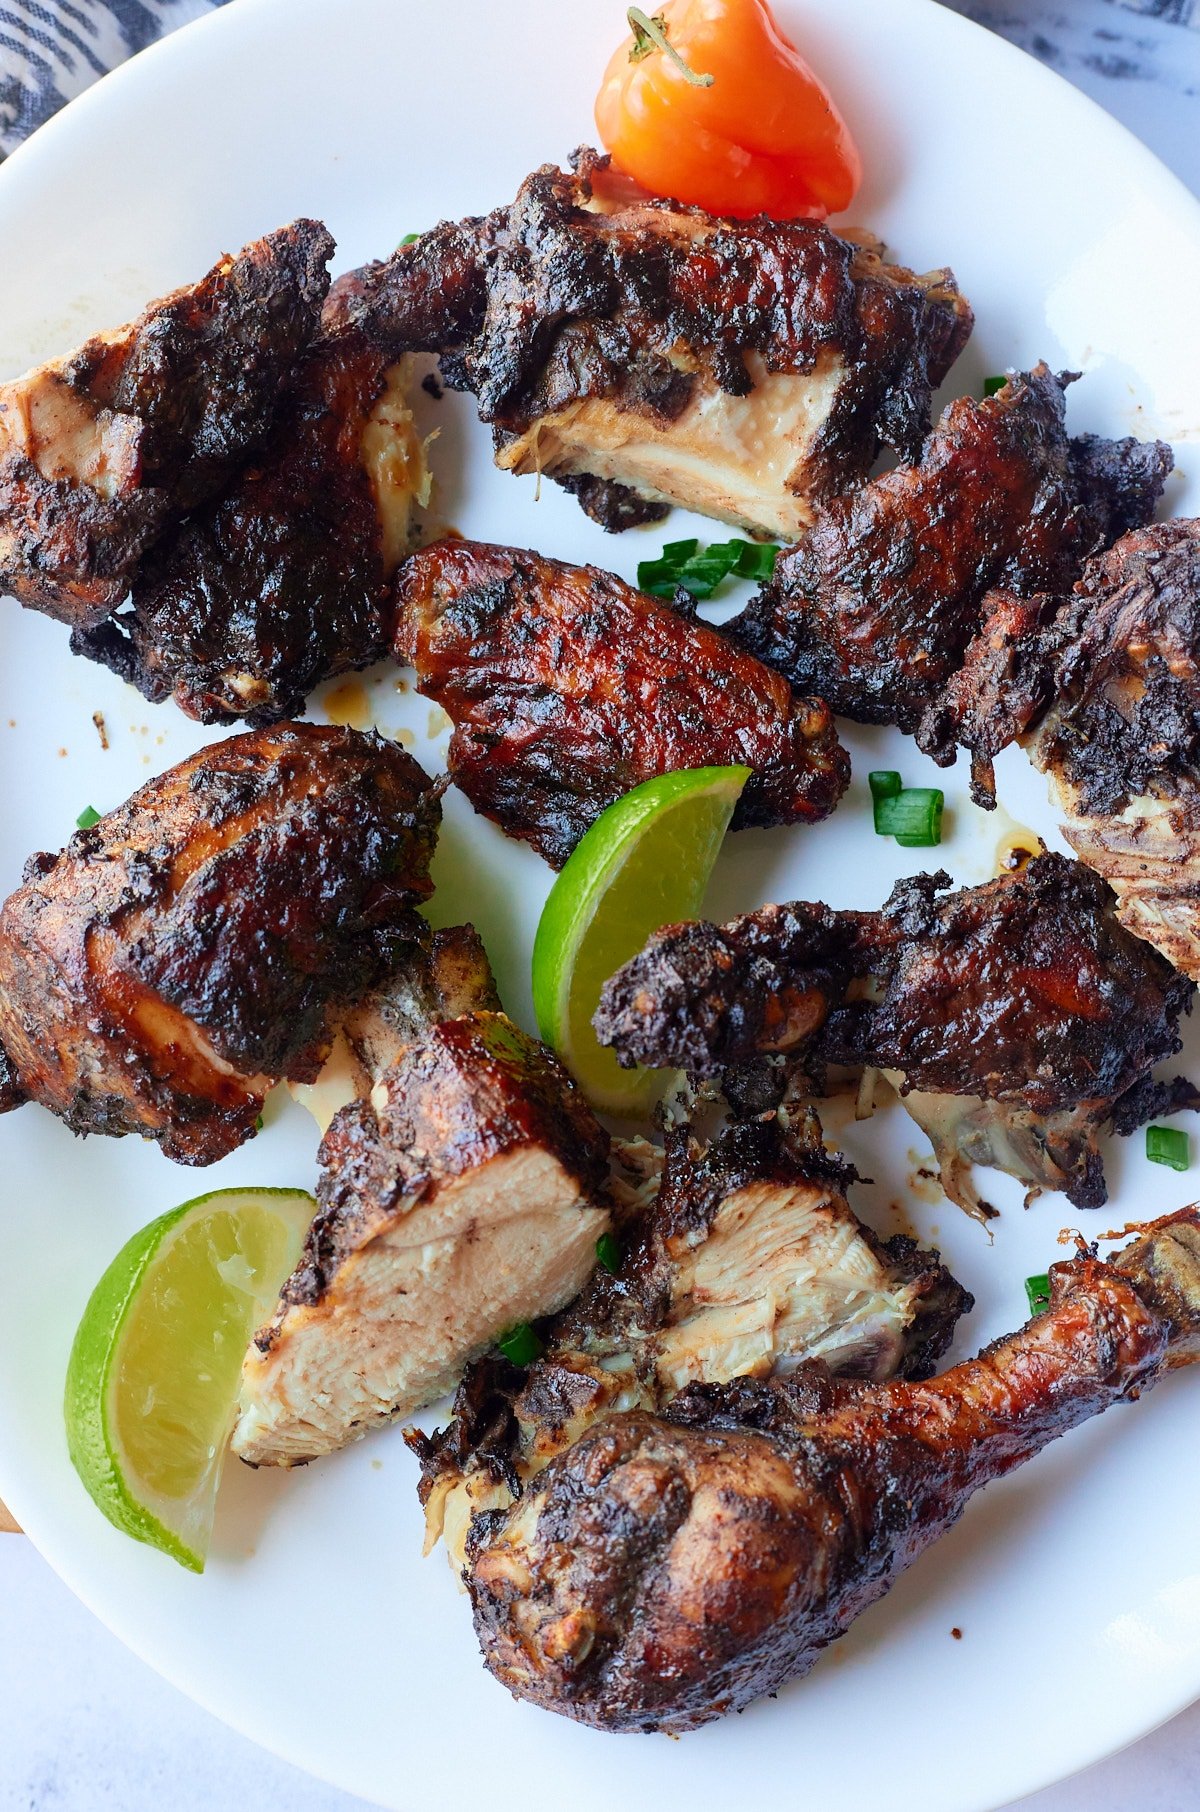 Jamaican jerk chicken cut up on a plate ready to eat.